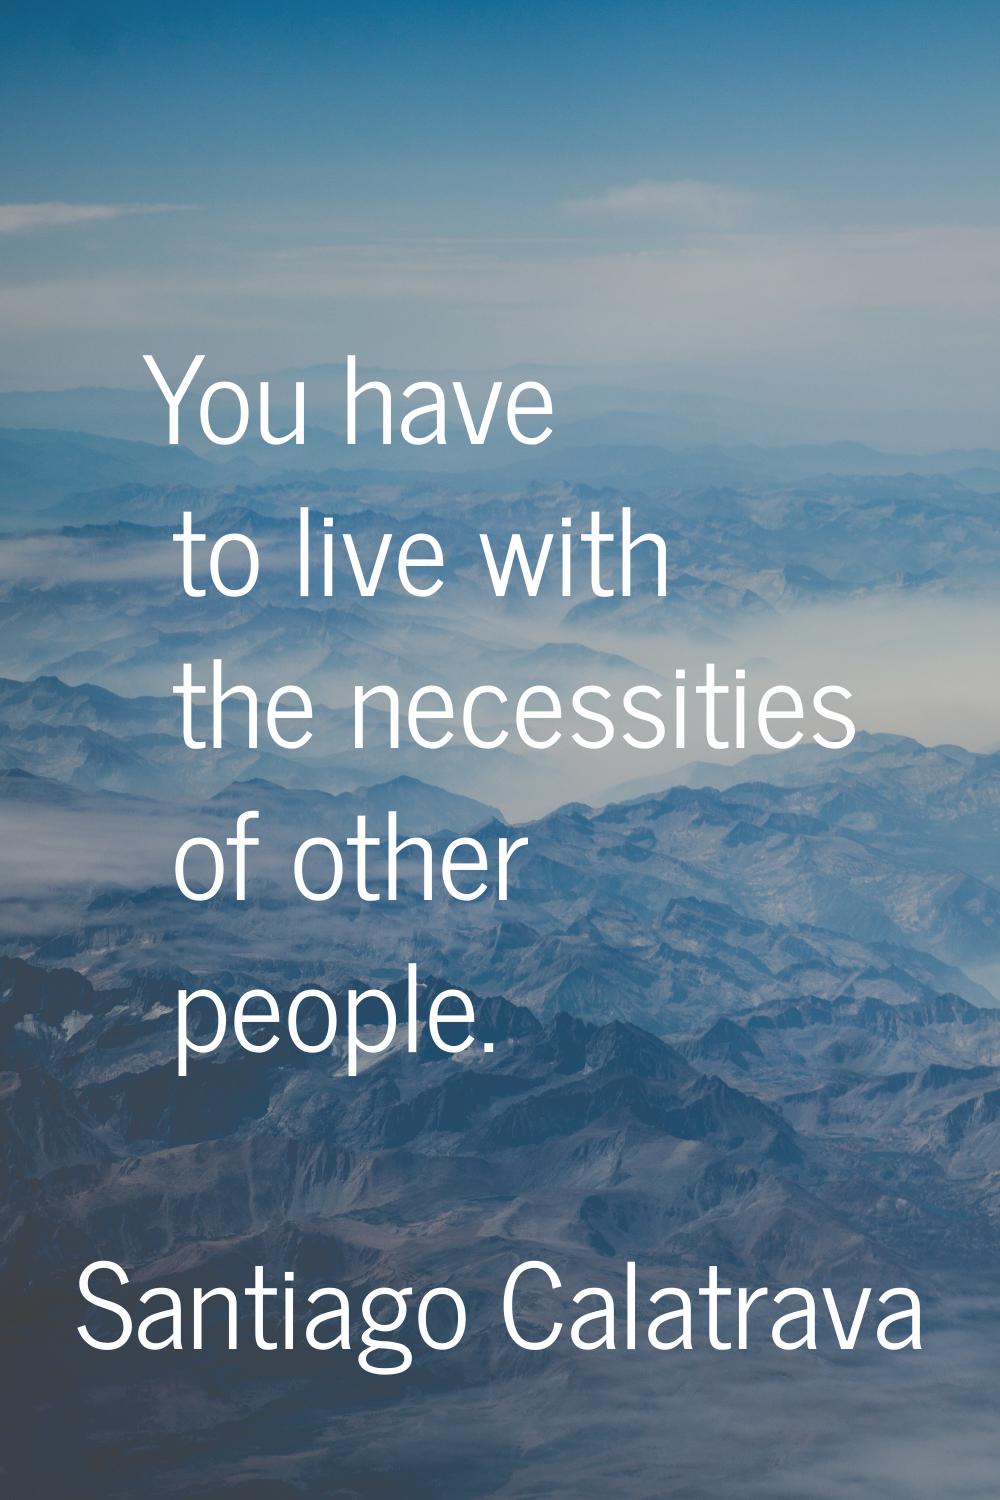 You have to live with the necessities of other people.